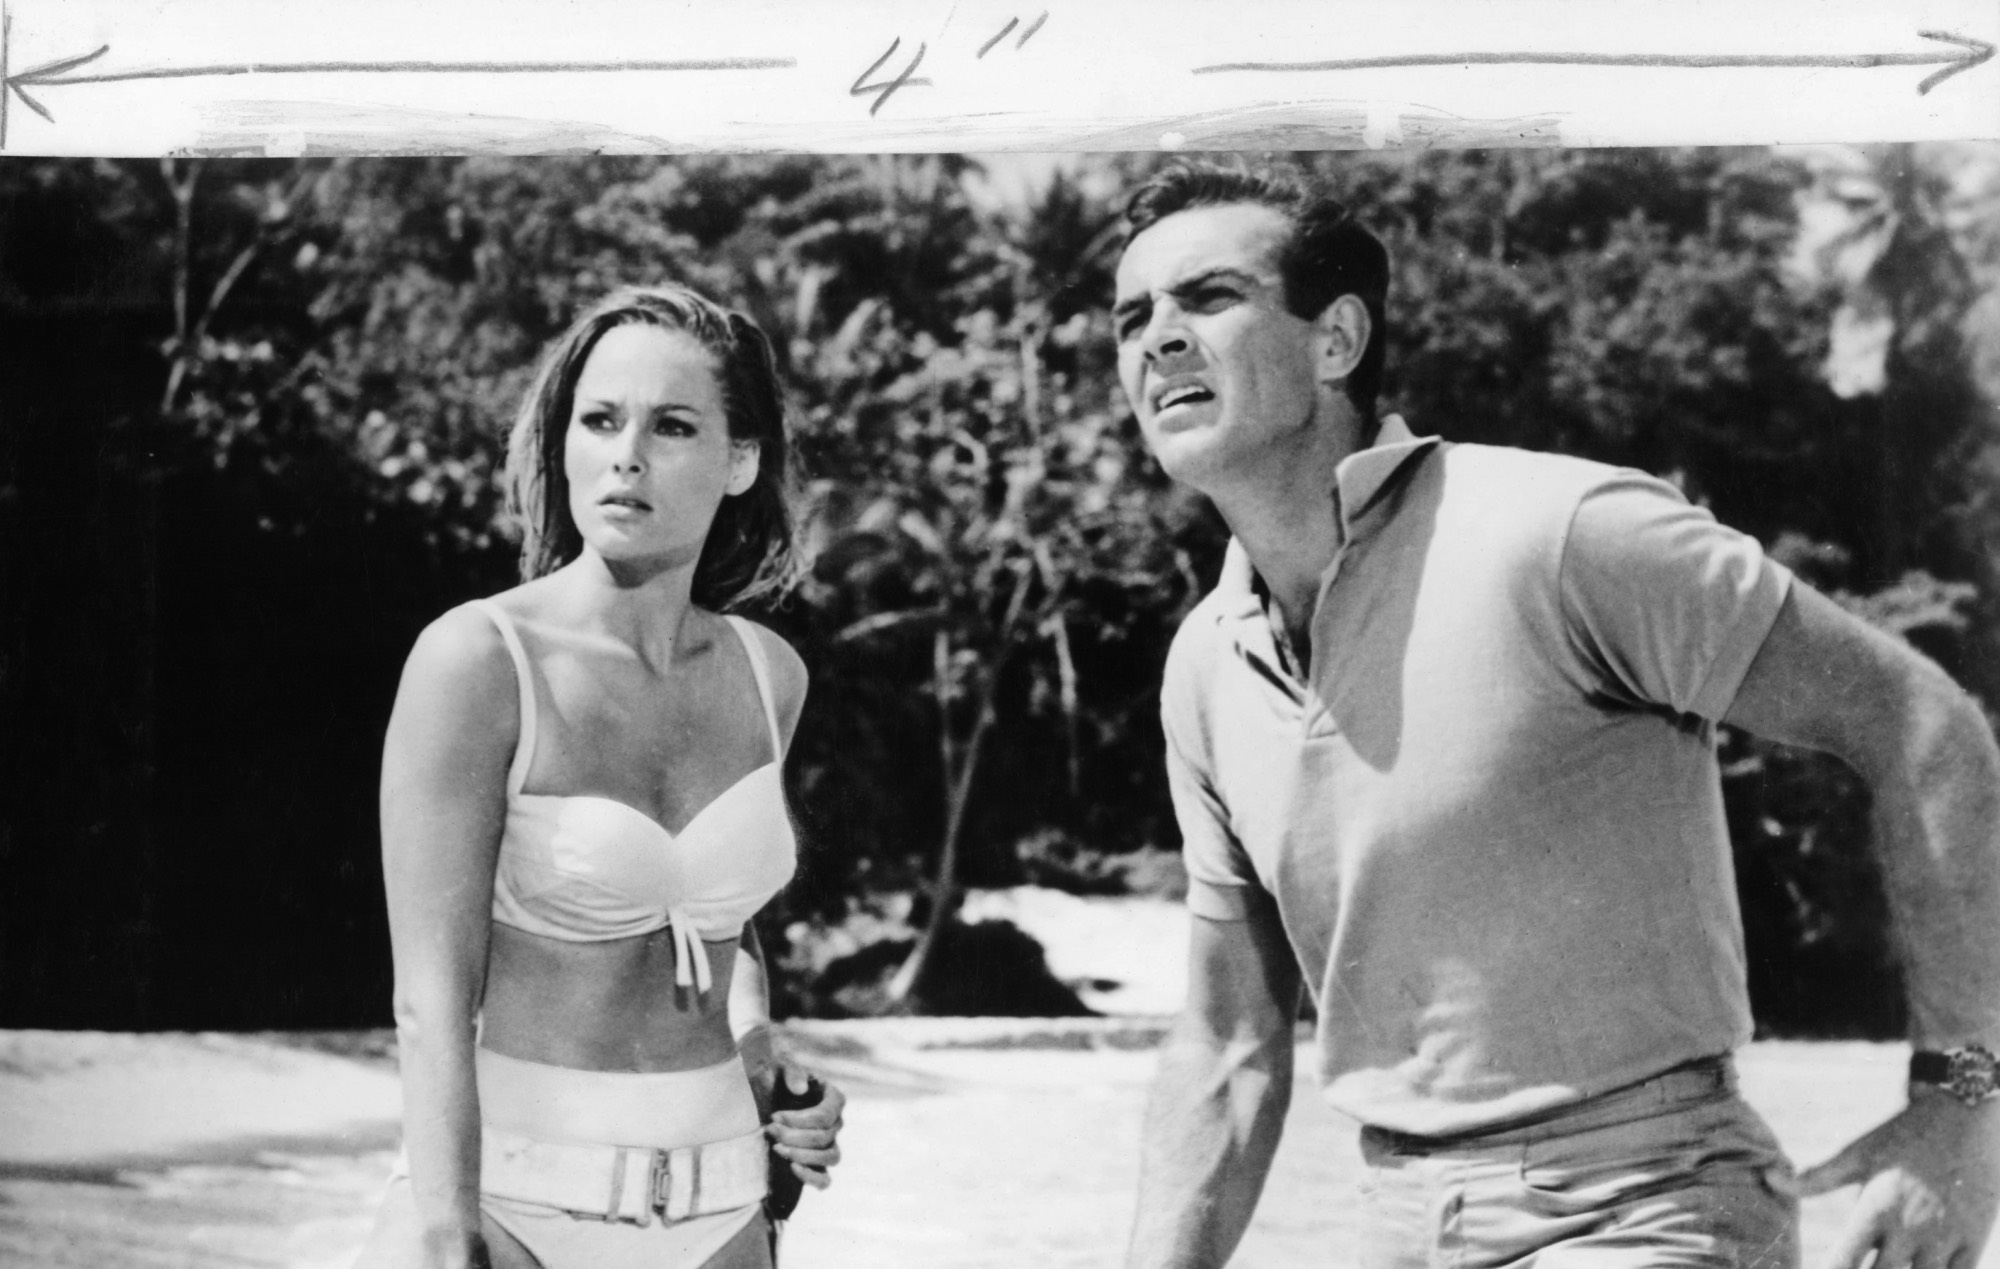 Female James Bond idea was discussed before ‘Dr No’ was made